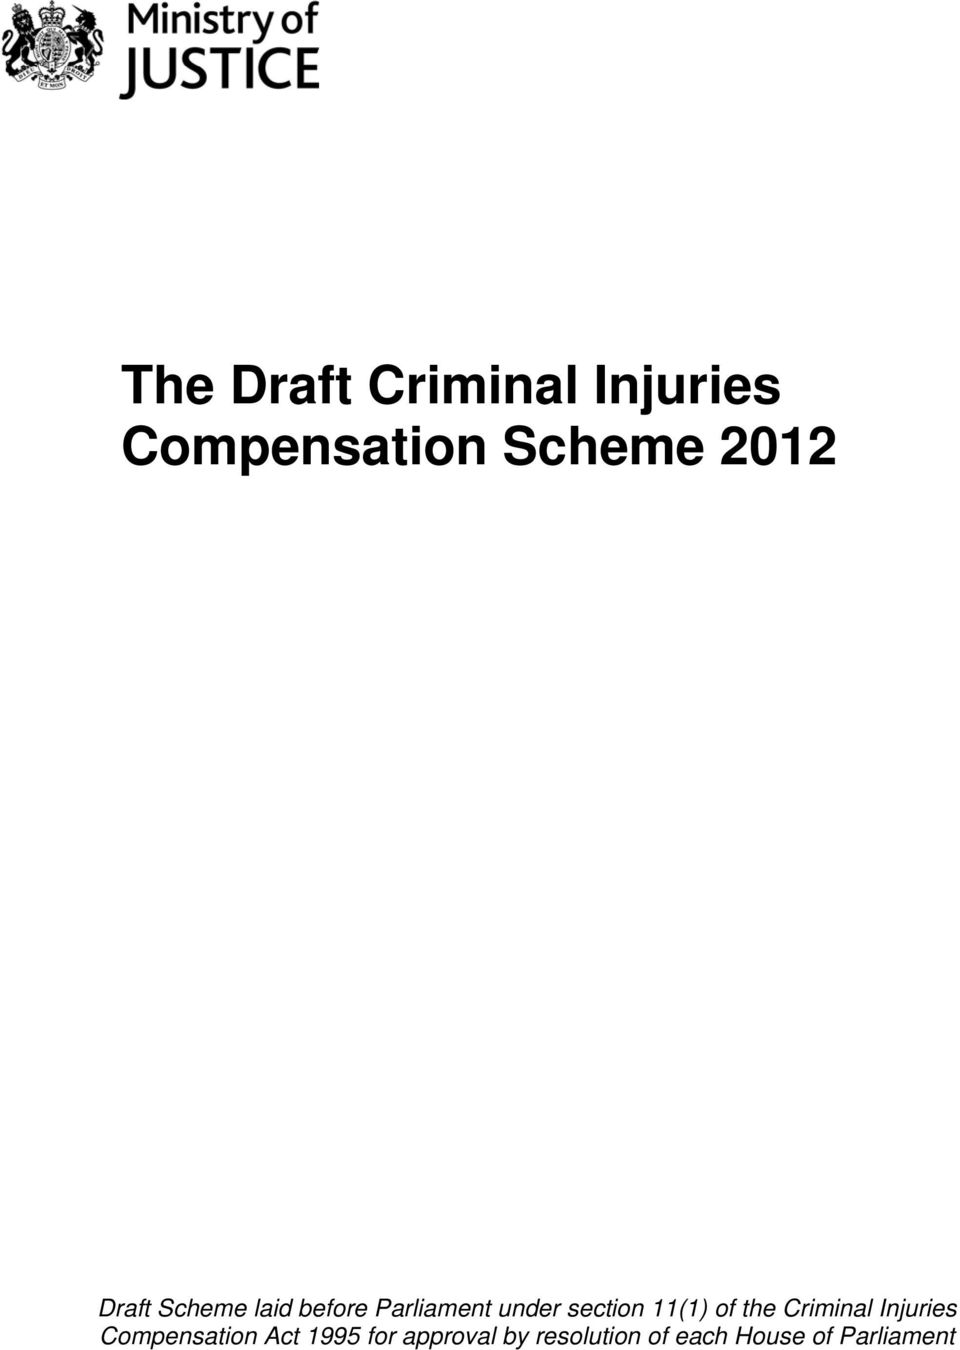 11(1) of the Criminal Injuries Compensation Act 1995